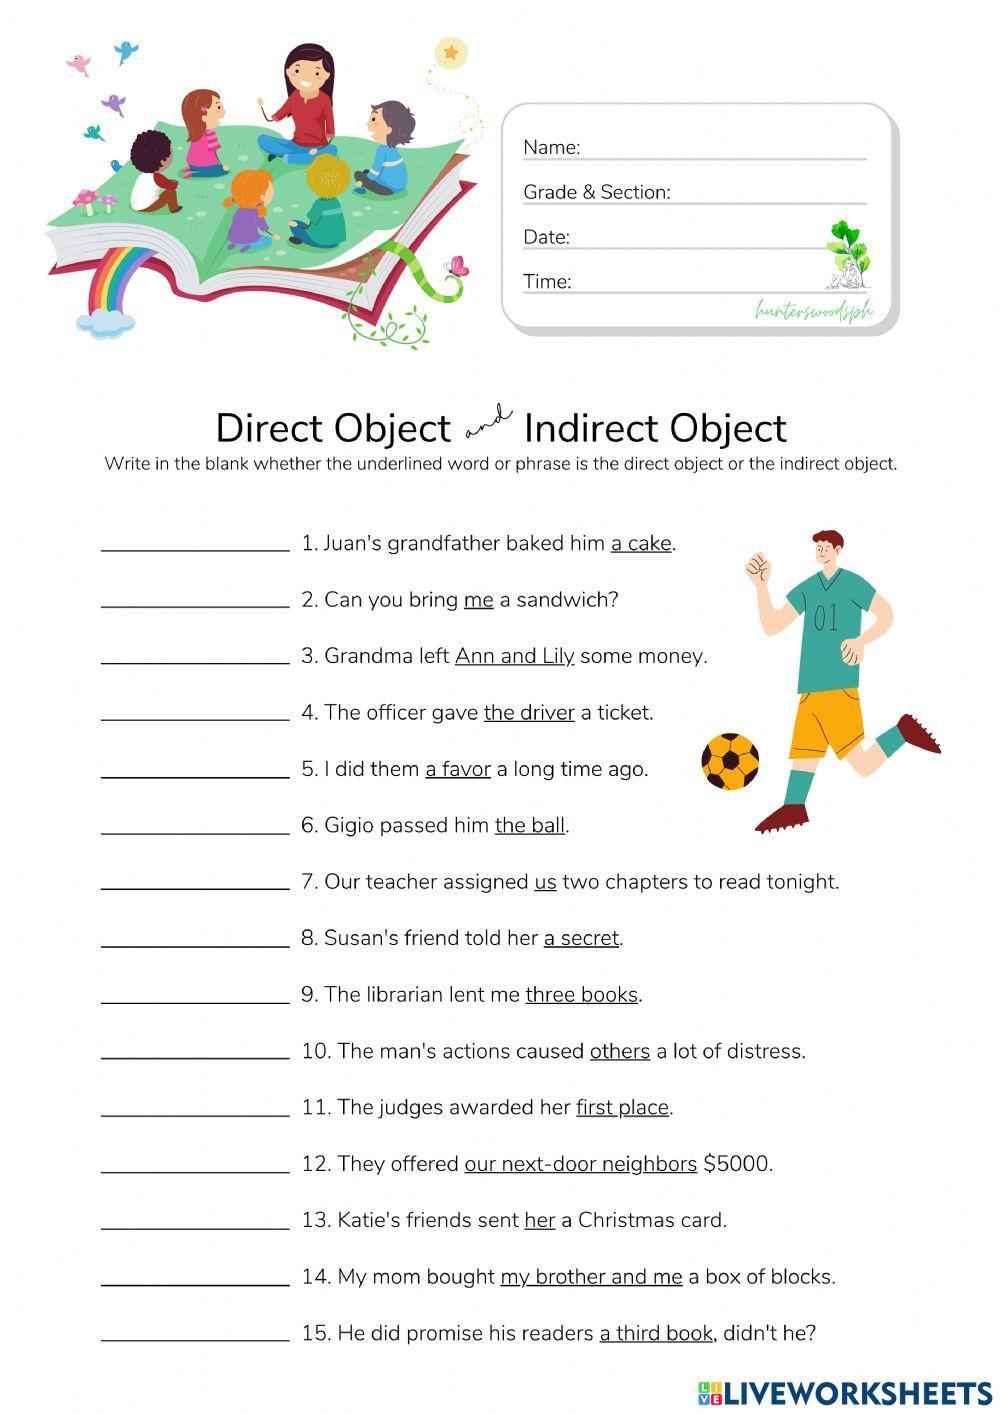 Indirect Object Worksheets 8th Grade